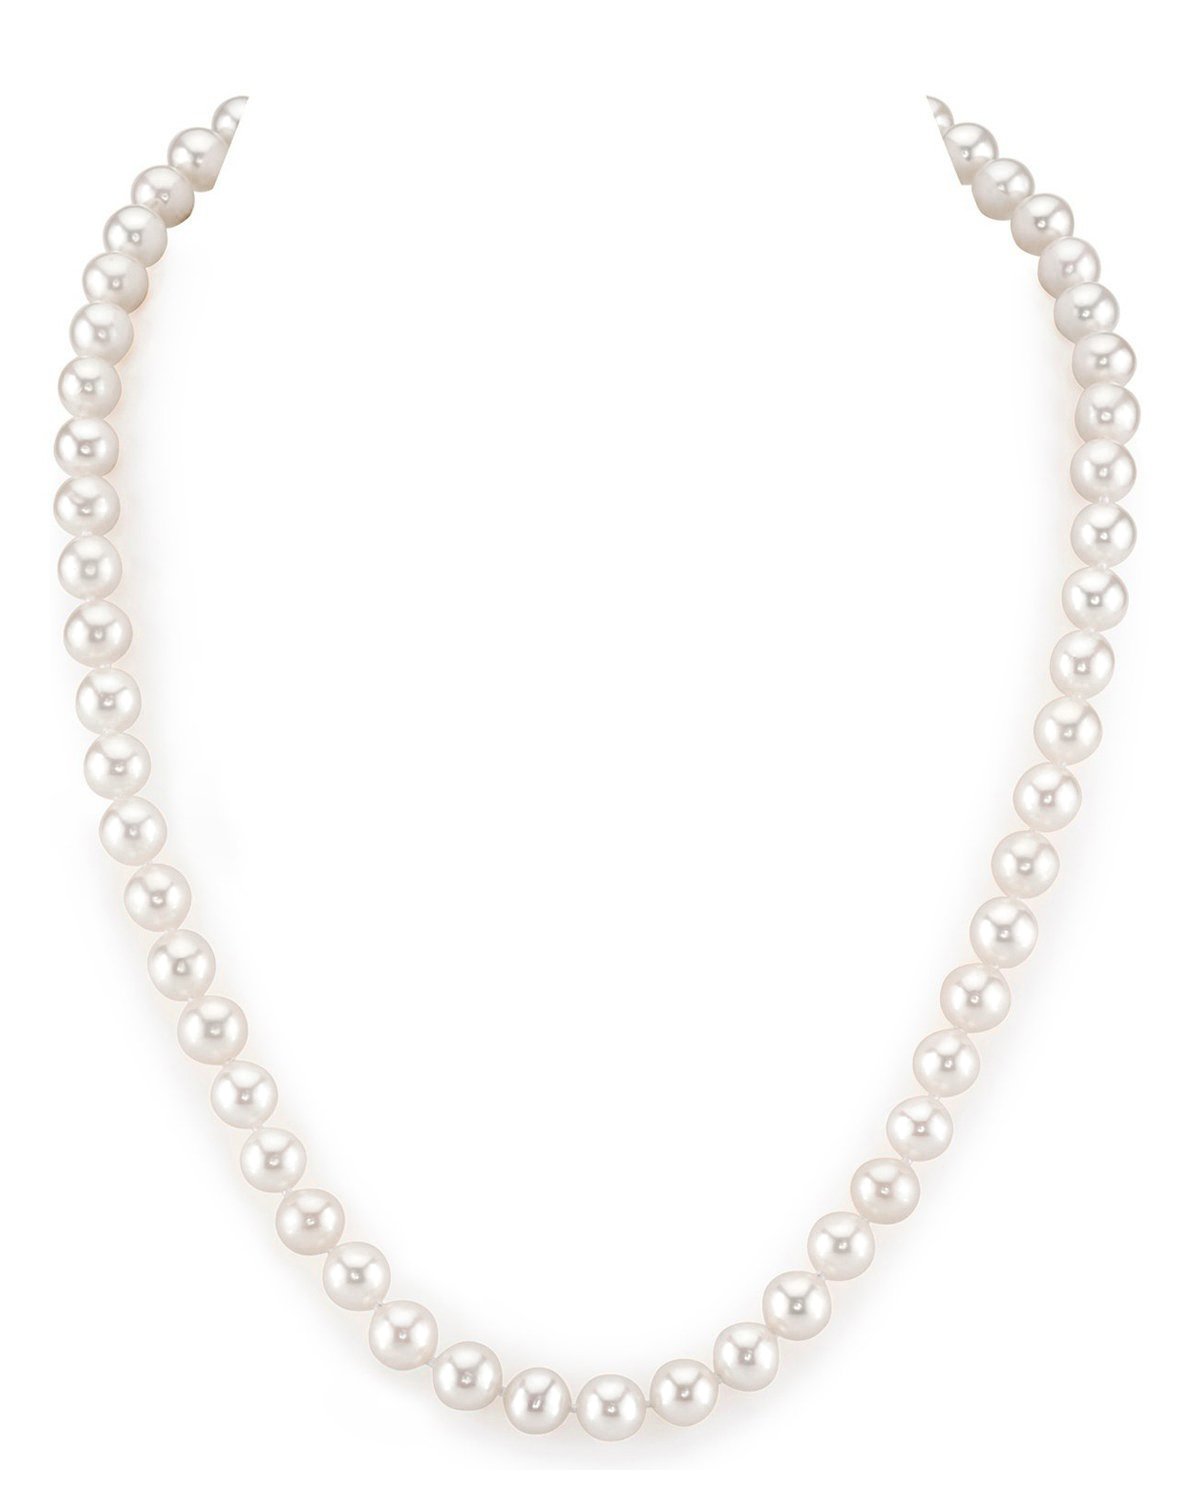 7.0-7.5mm White Freshwater Pearl Necklace - AAAA Quality 20 Matinee Length / Ball Magnetic Clasp - Sterling Silver